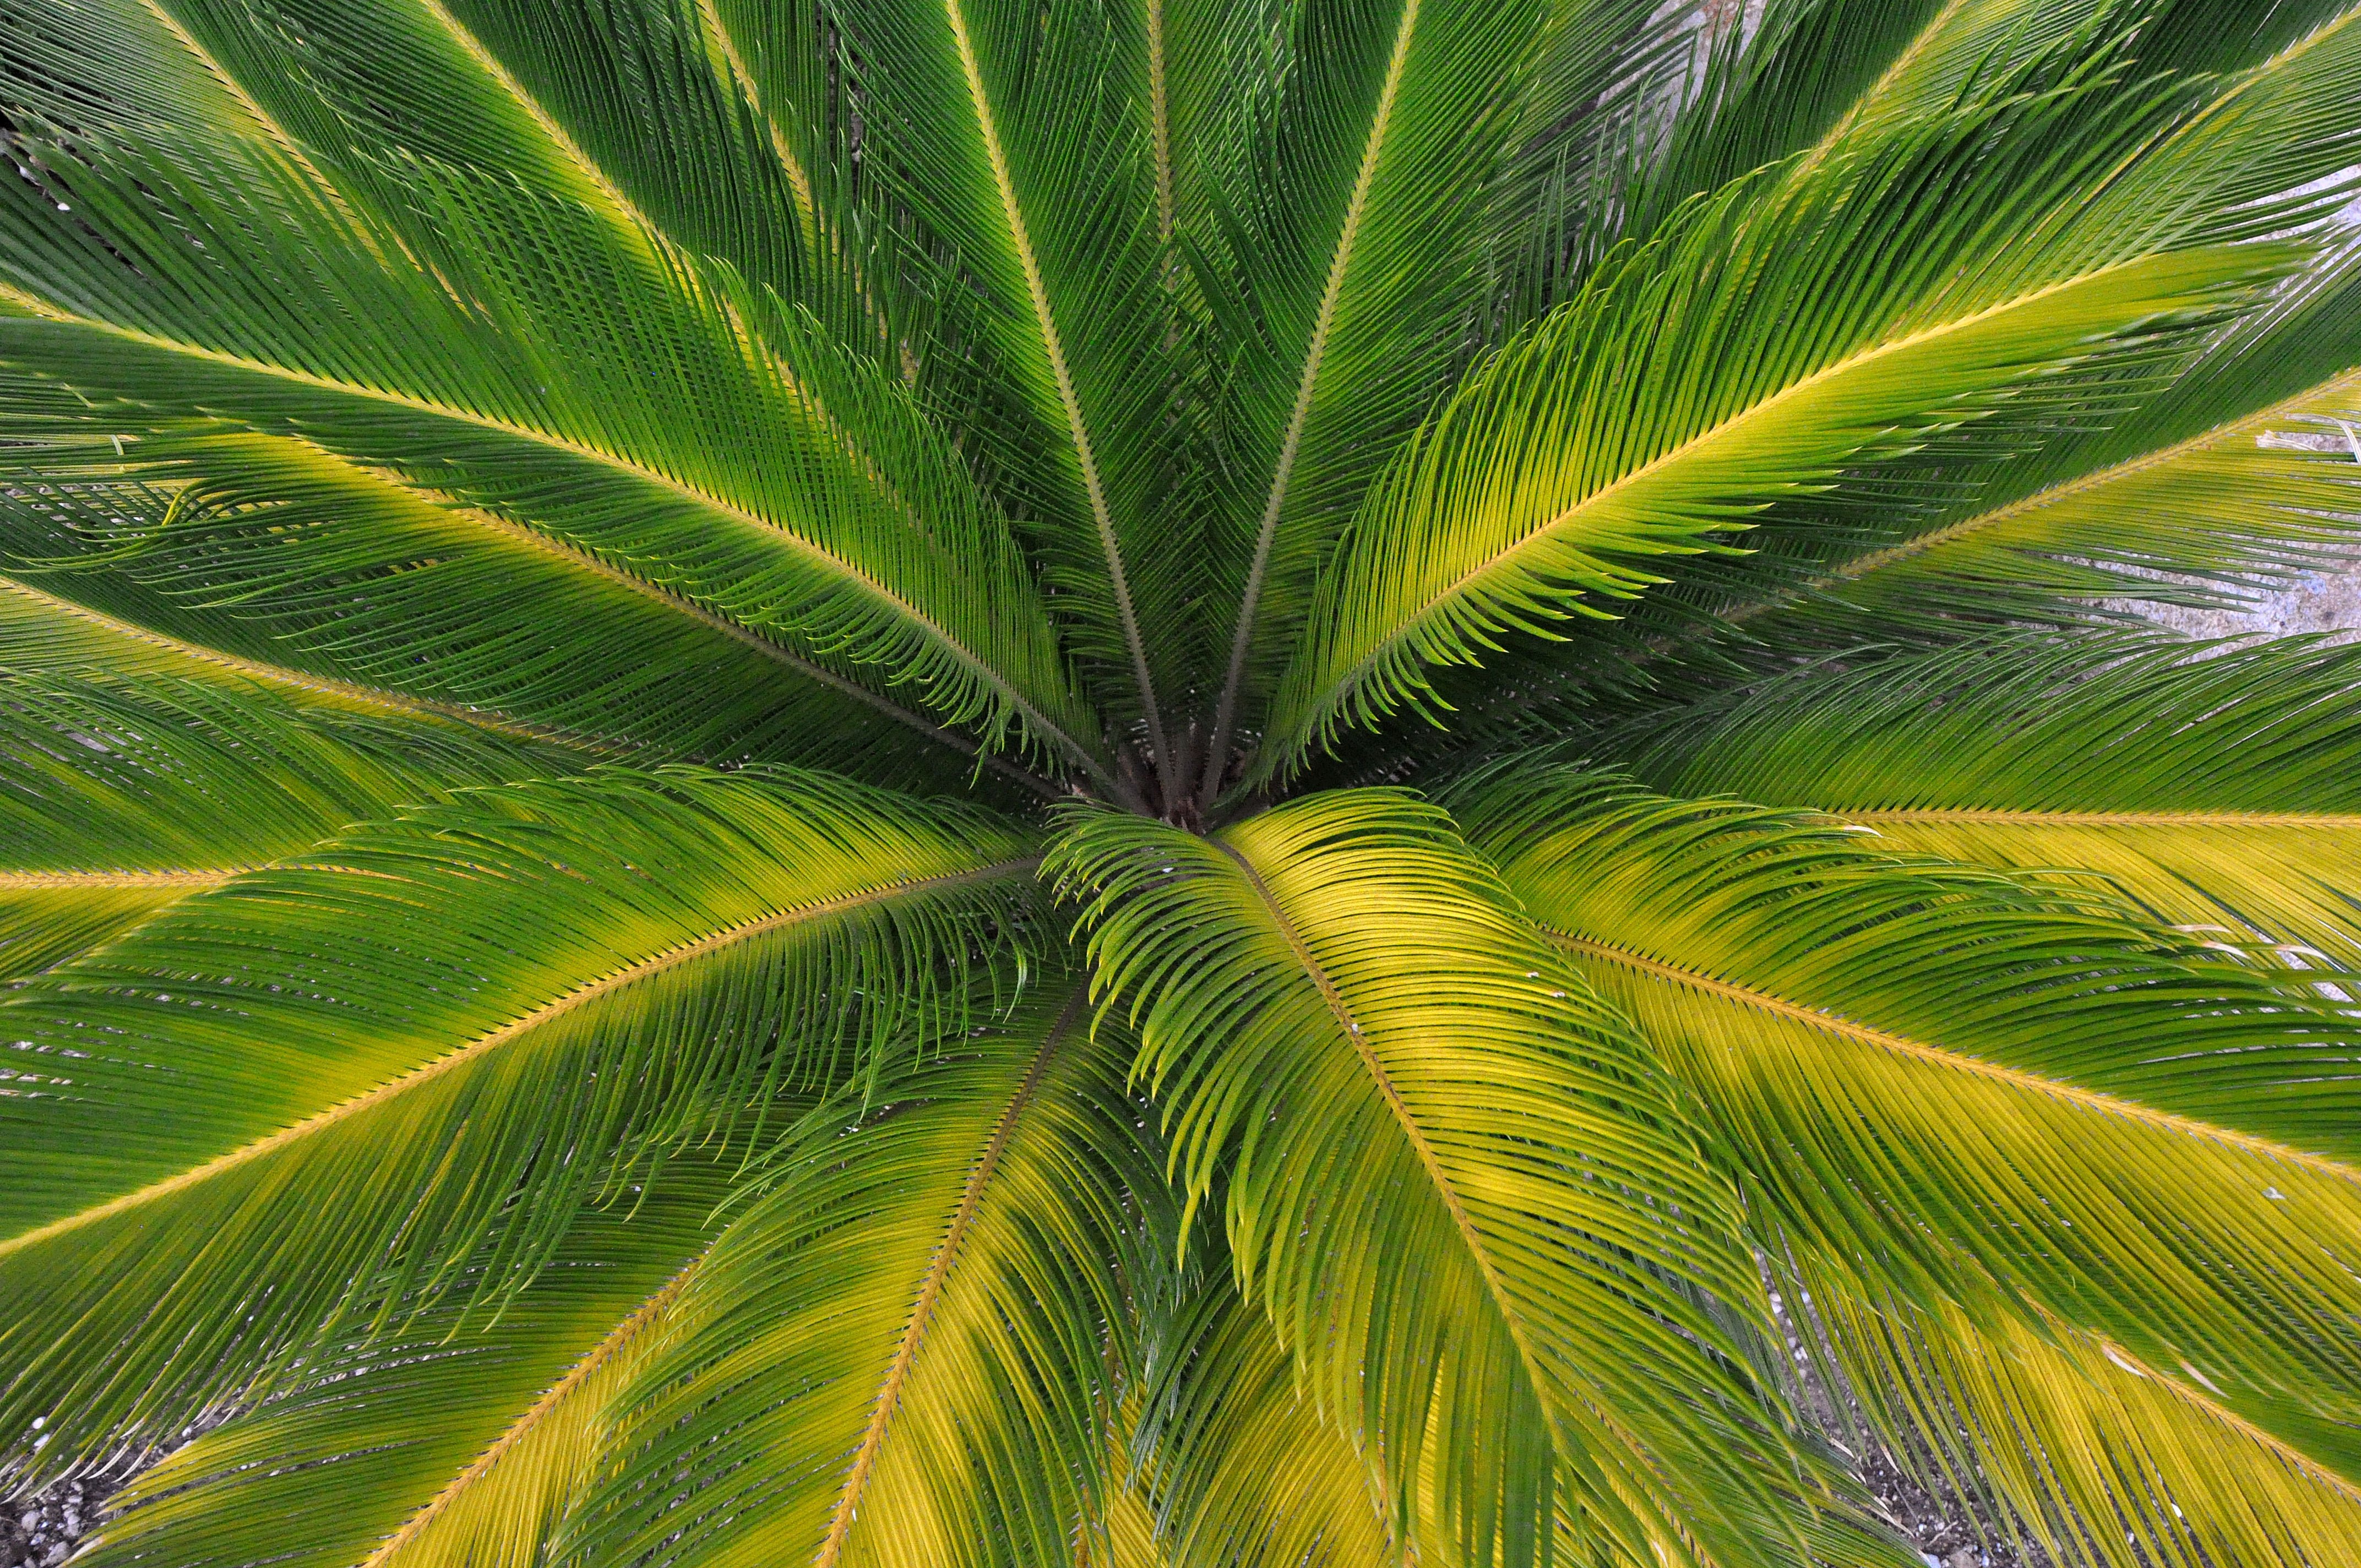 Palm leaves nature wallpaper 4288x2848 247281 WallpaperUP 4288x2848